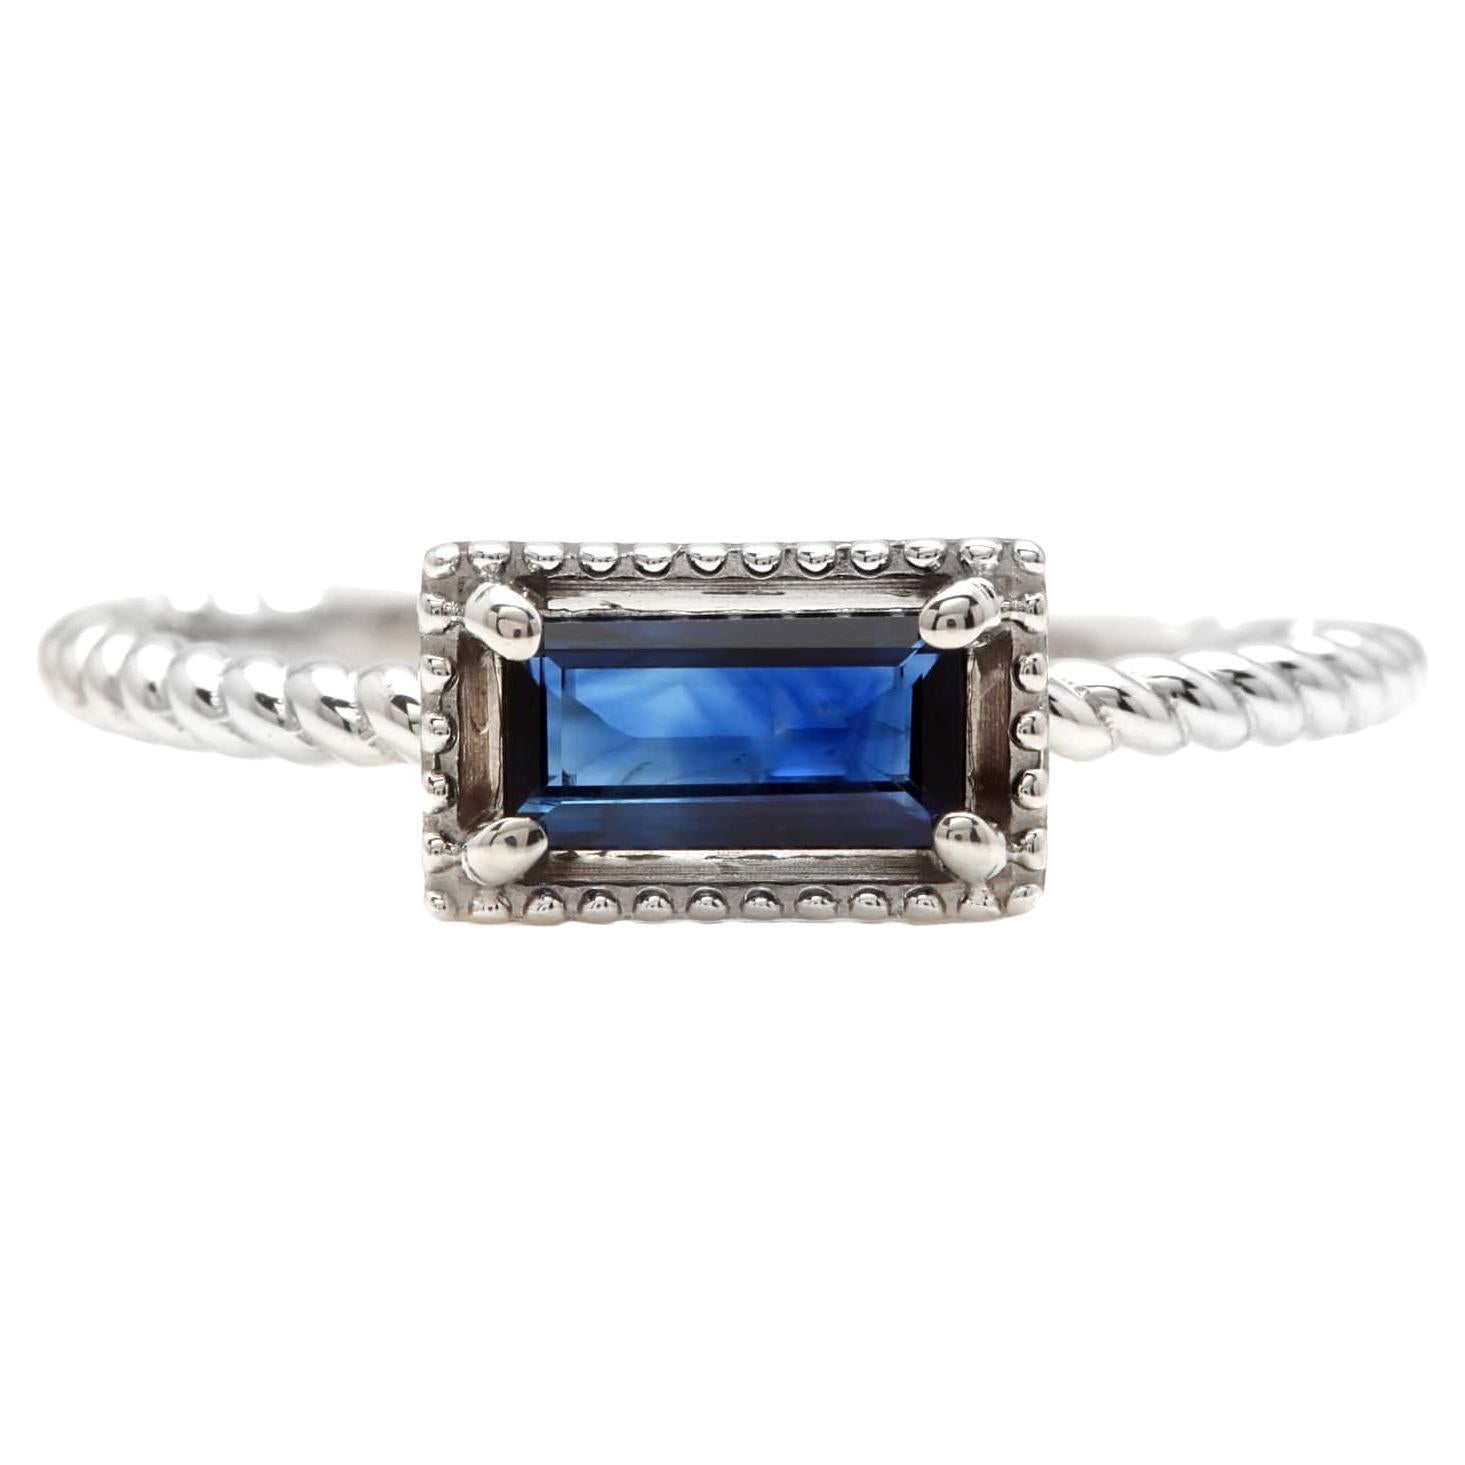 Exquisite Natural Blue Sapphire 14K Solid White Gold Ring